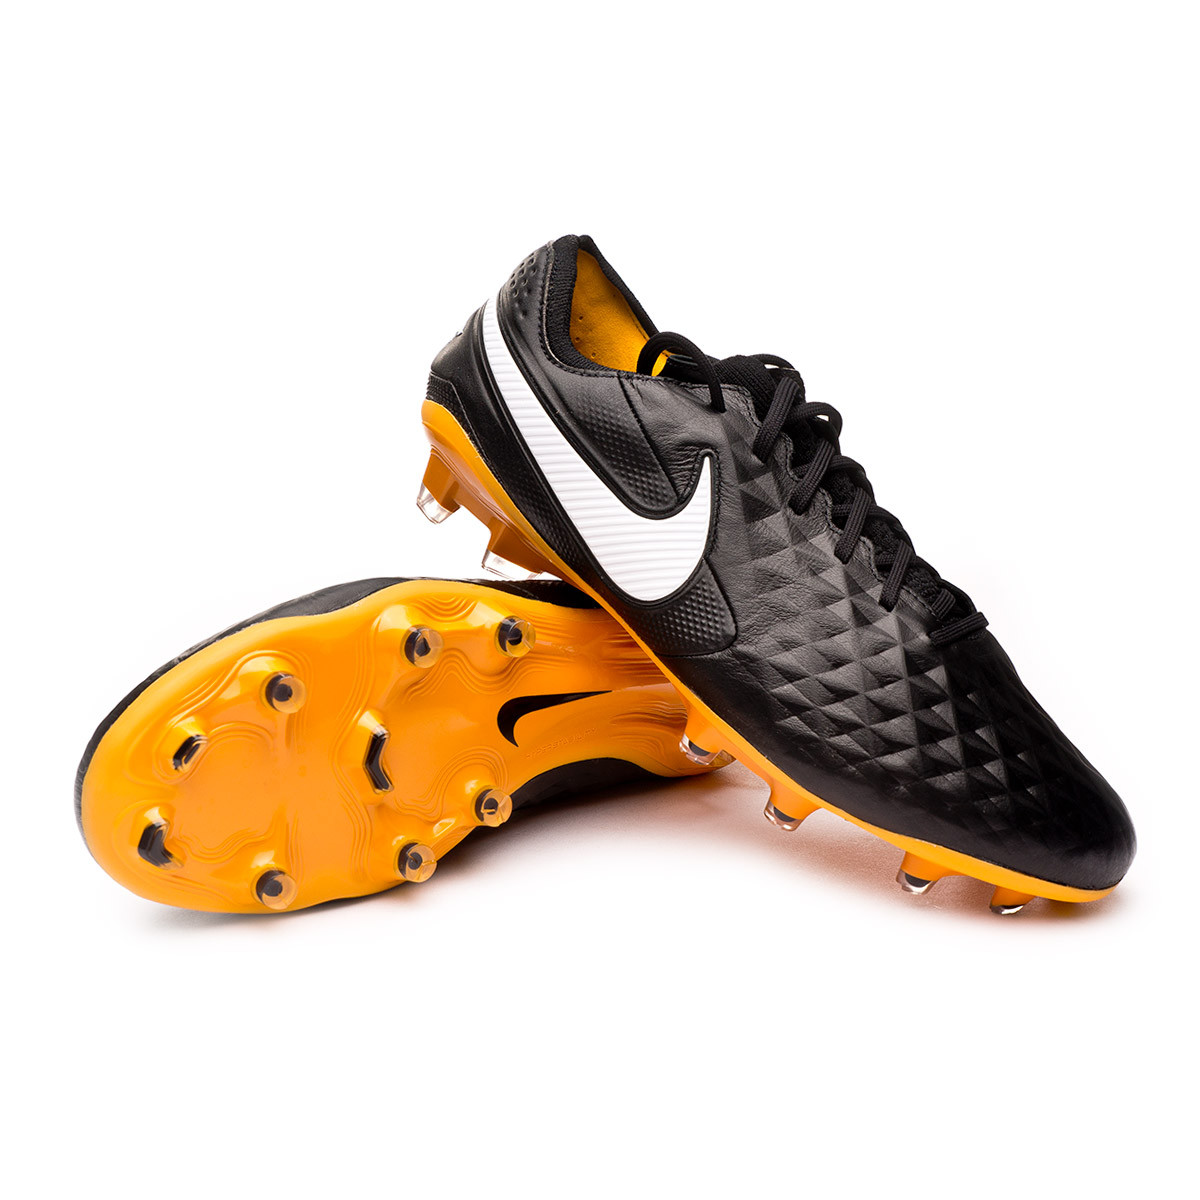 black and gold football boots nike